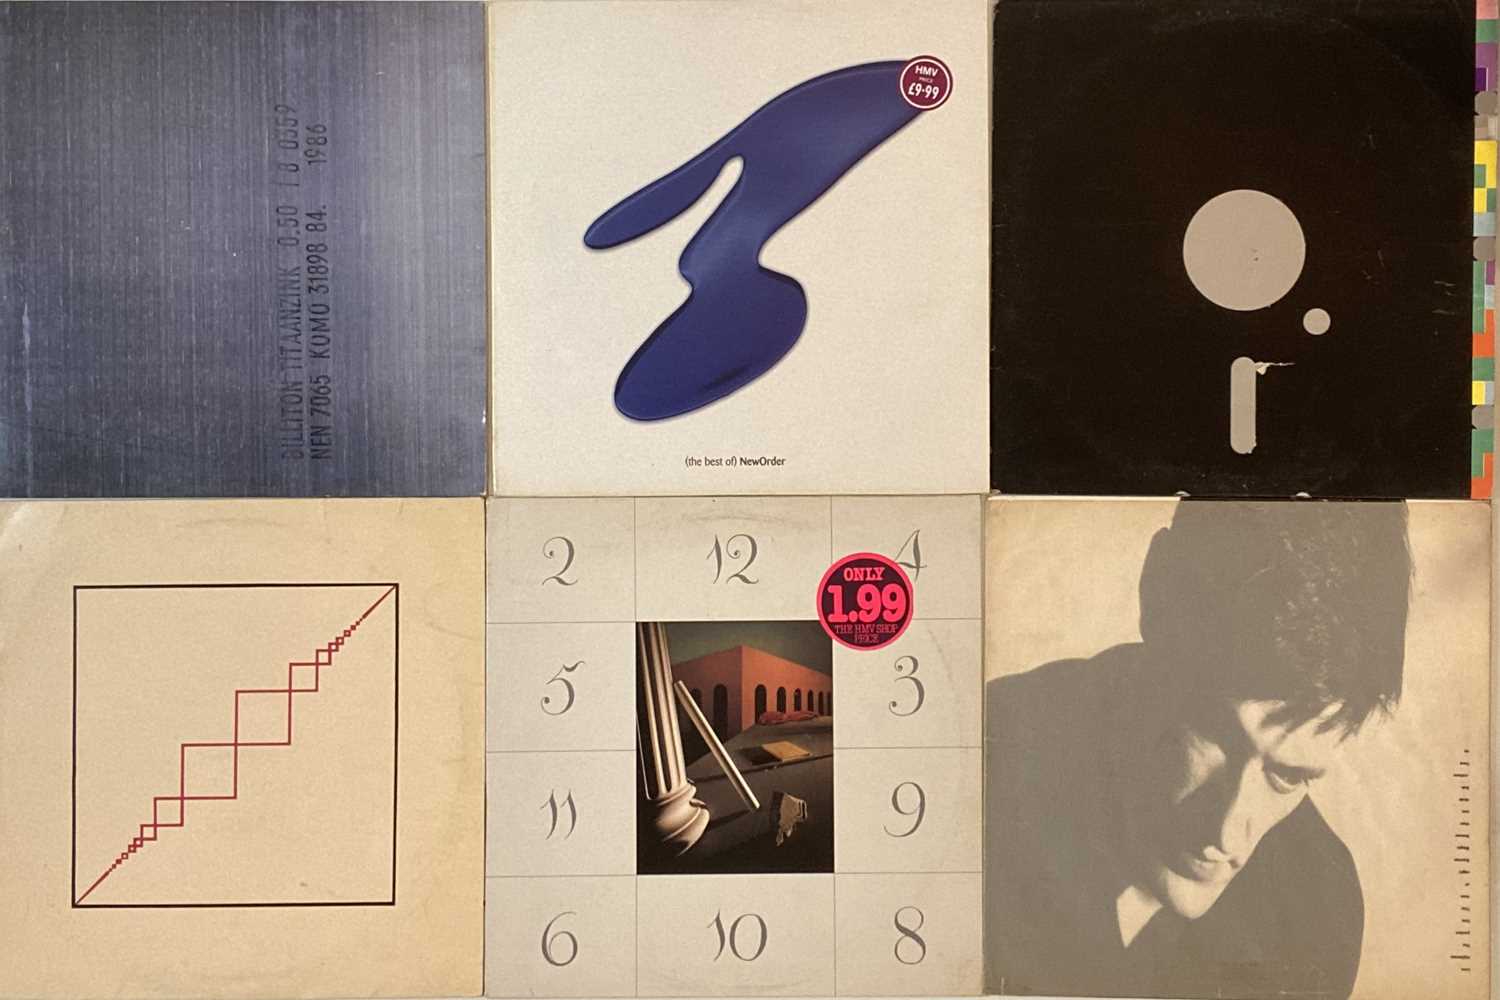 Lot 369 - NEW ORDER - LPs/ 12"